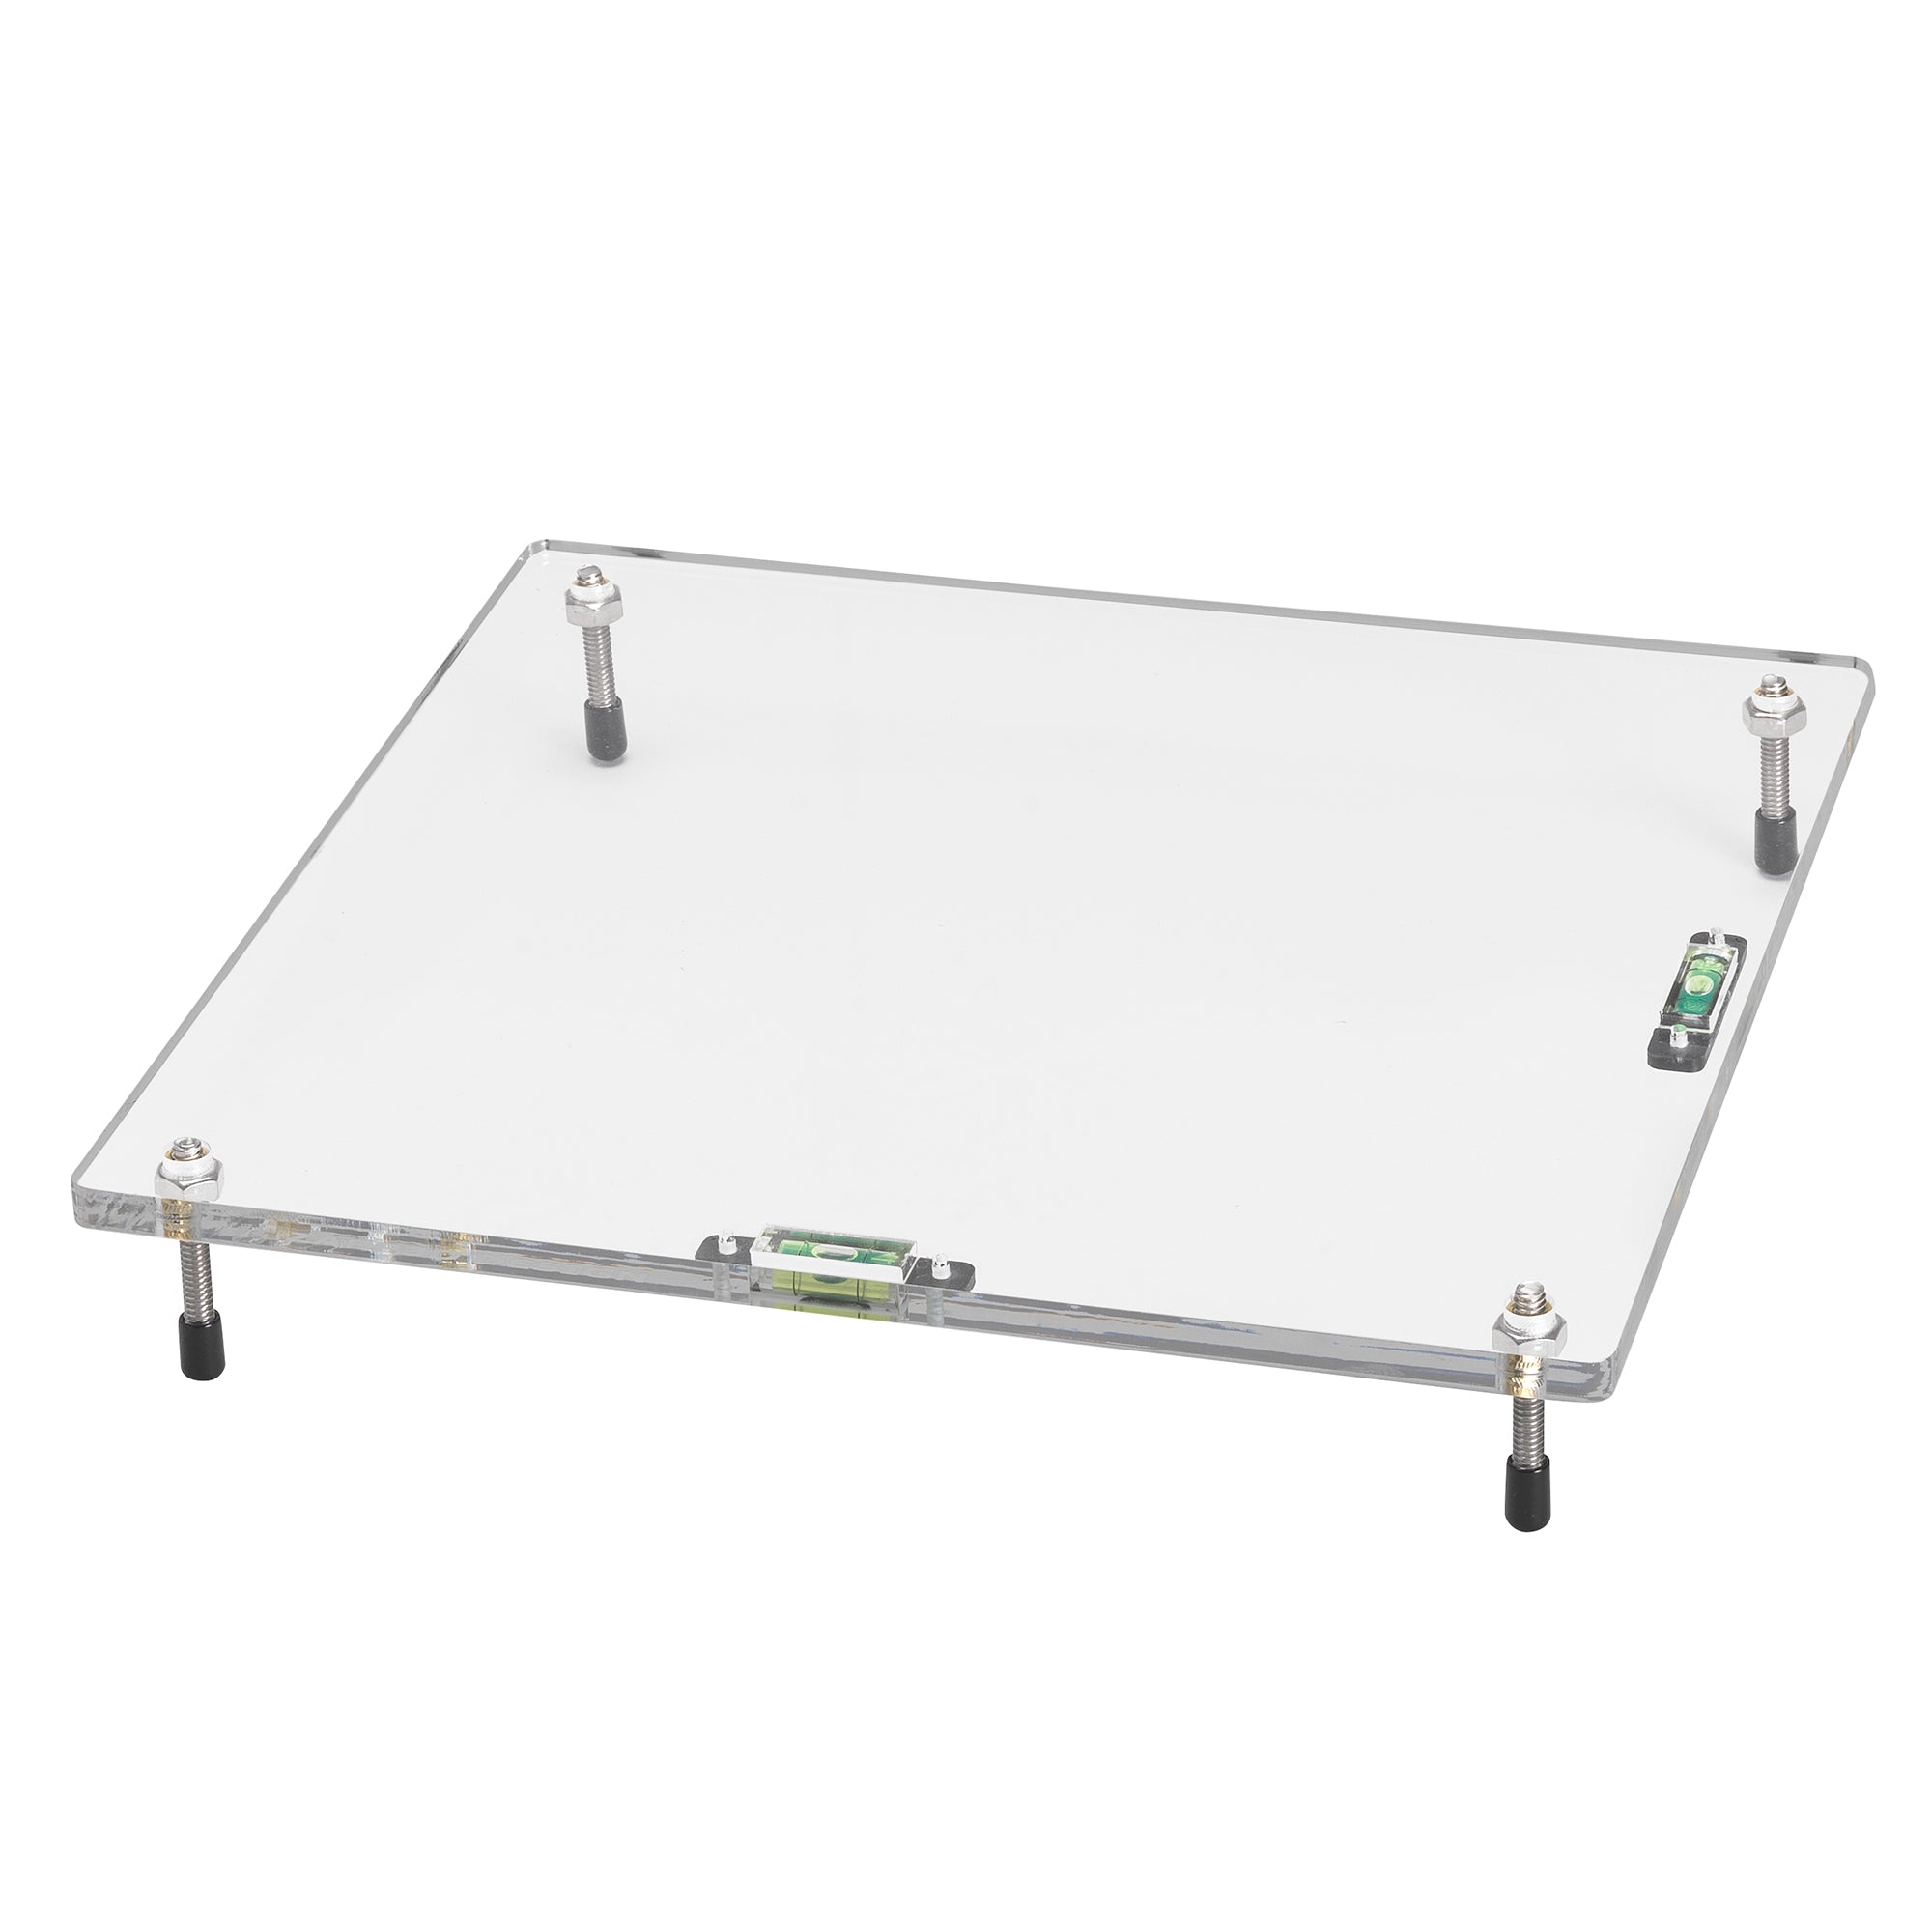 Adjustable Leveling Table For Epoxy And Art Work, Leveling Table